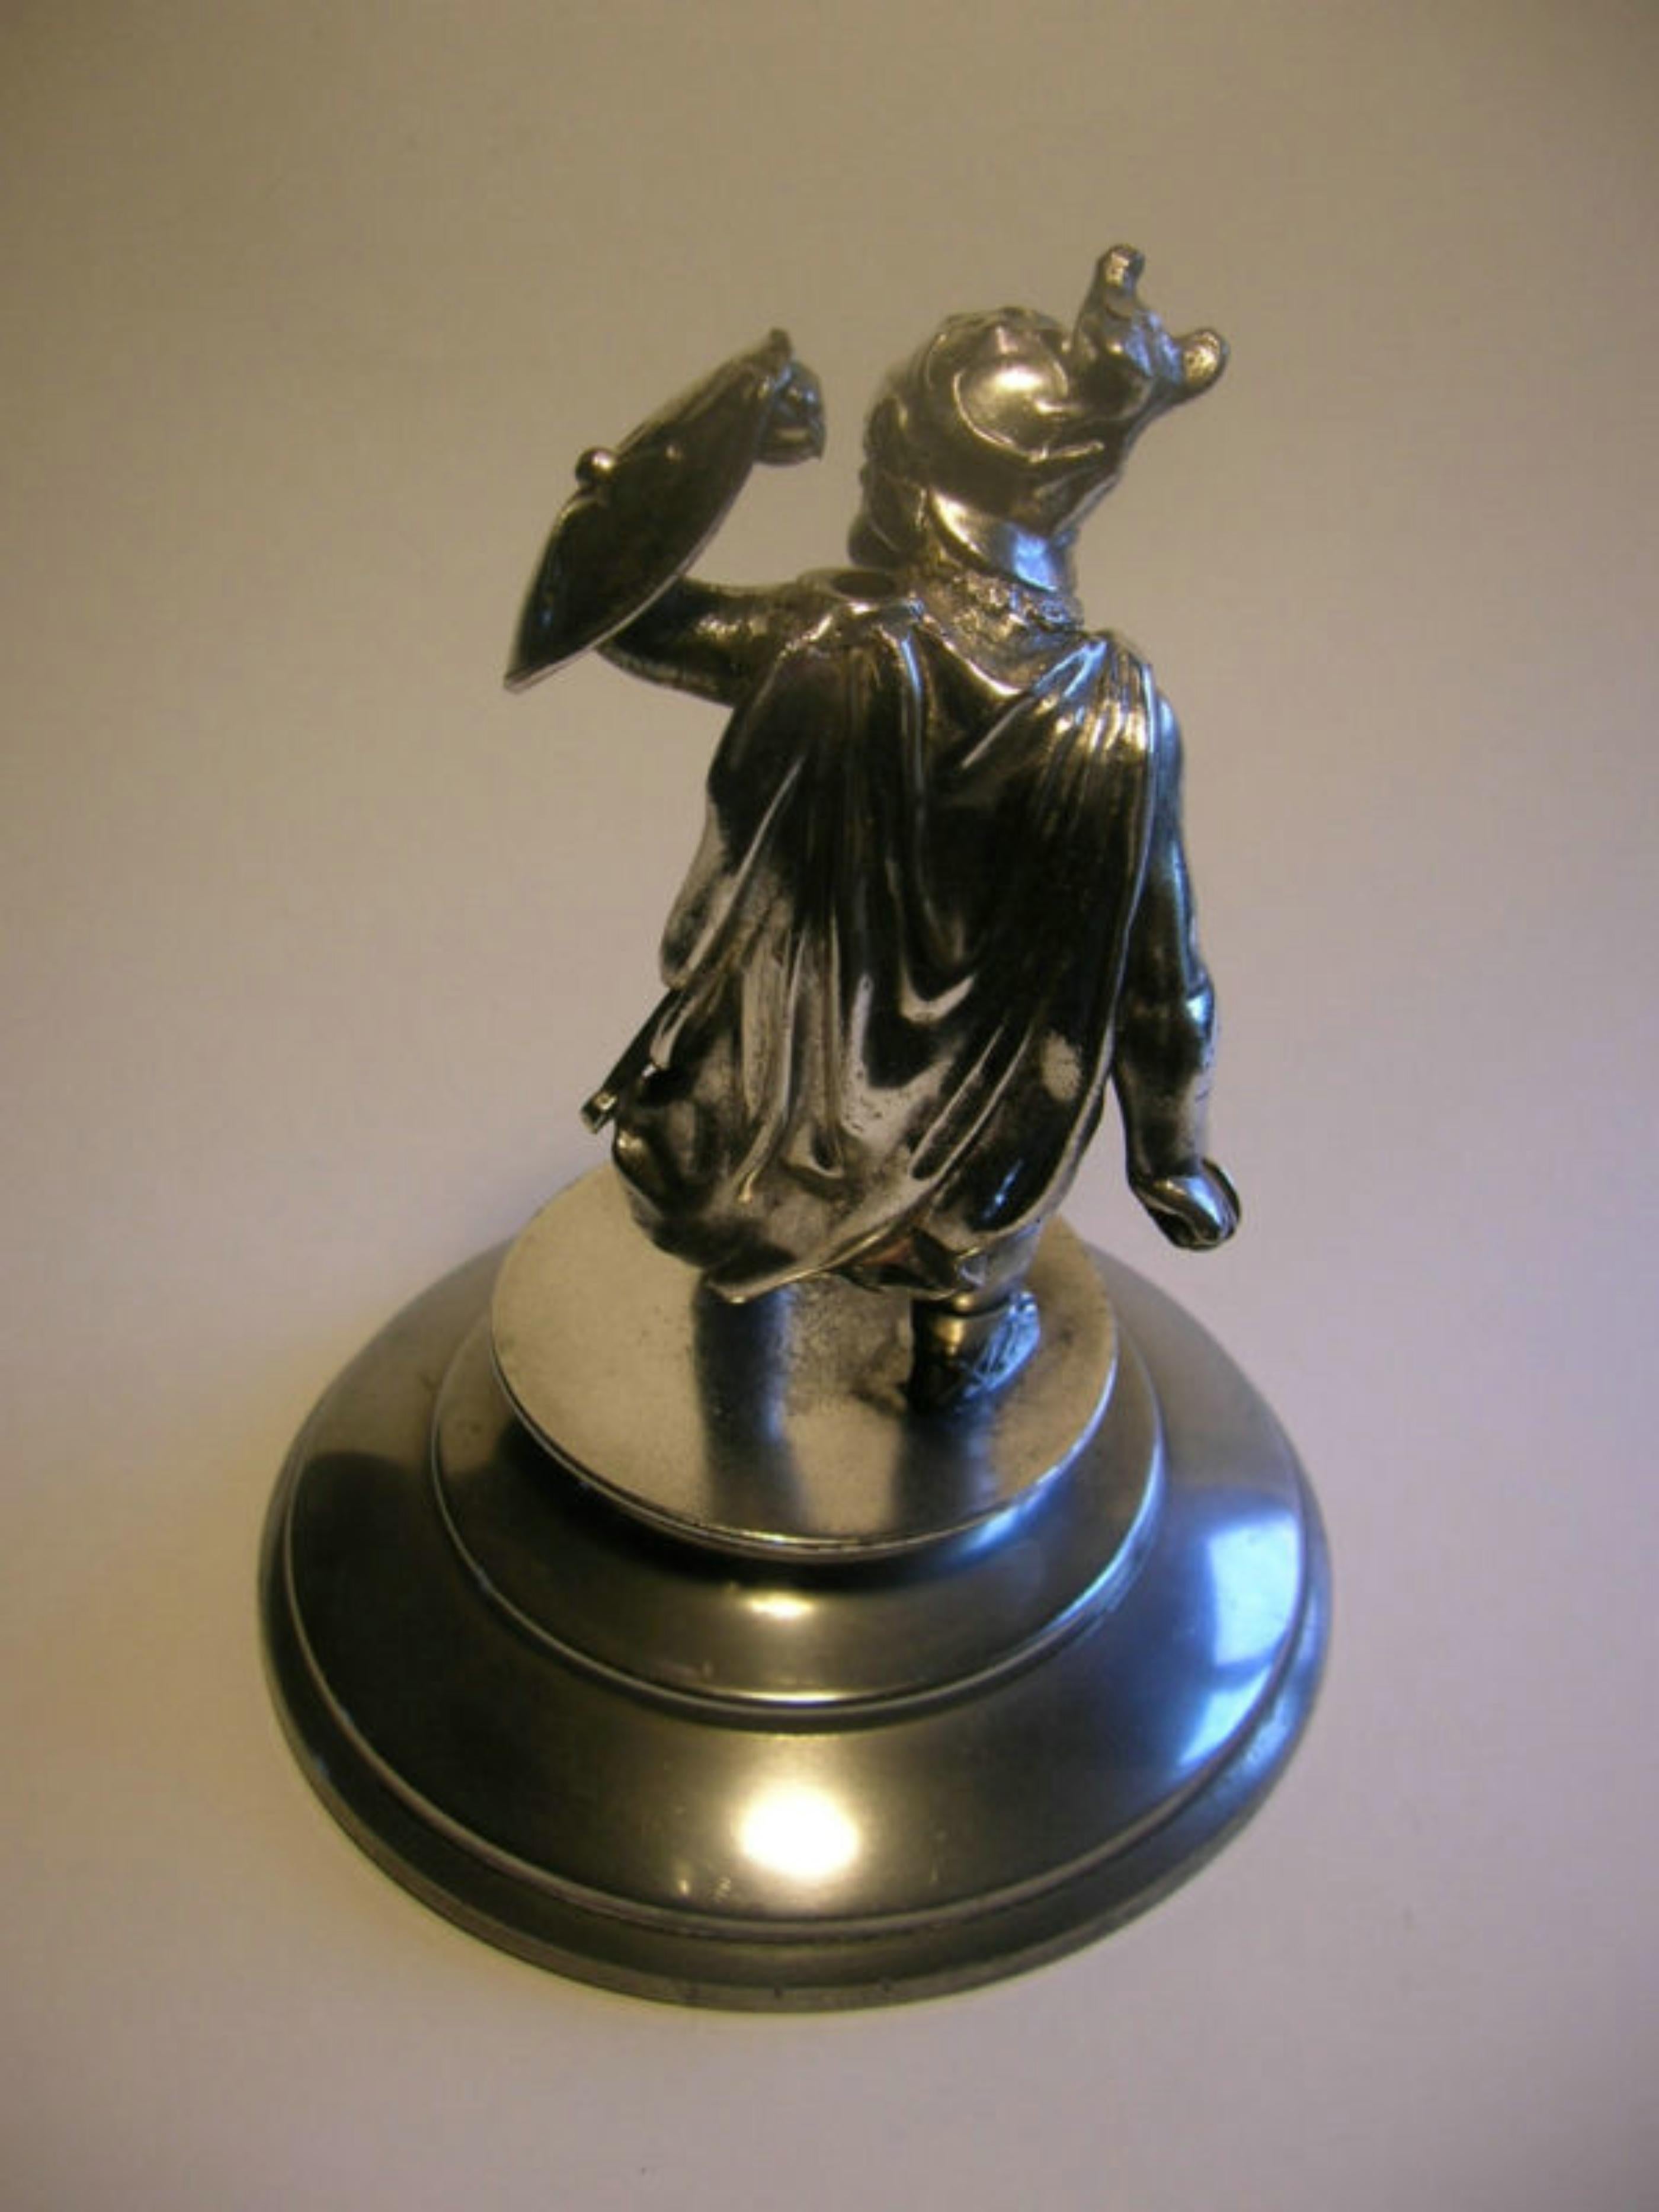 MIDDLETOWN PLATE CO. - Antique Neoclassical Warrior Statue - U.S. - Late 19th C. For Sale 5